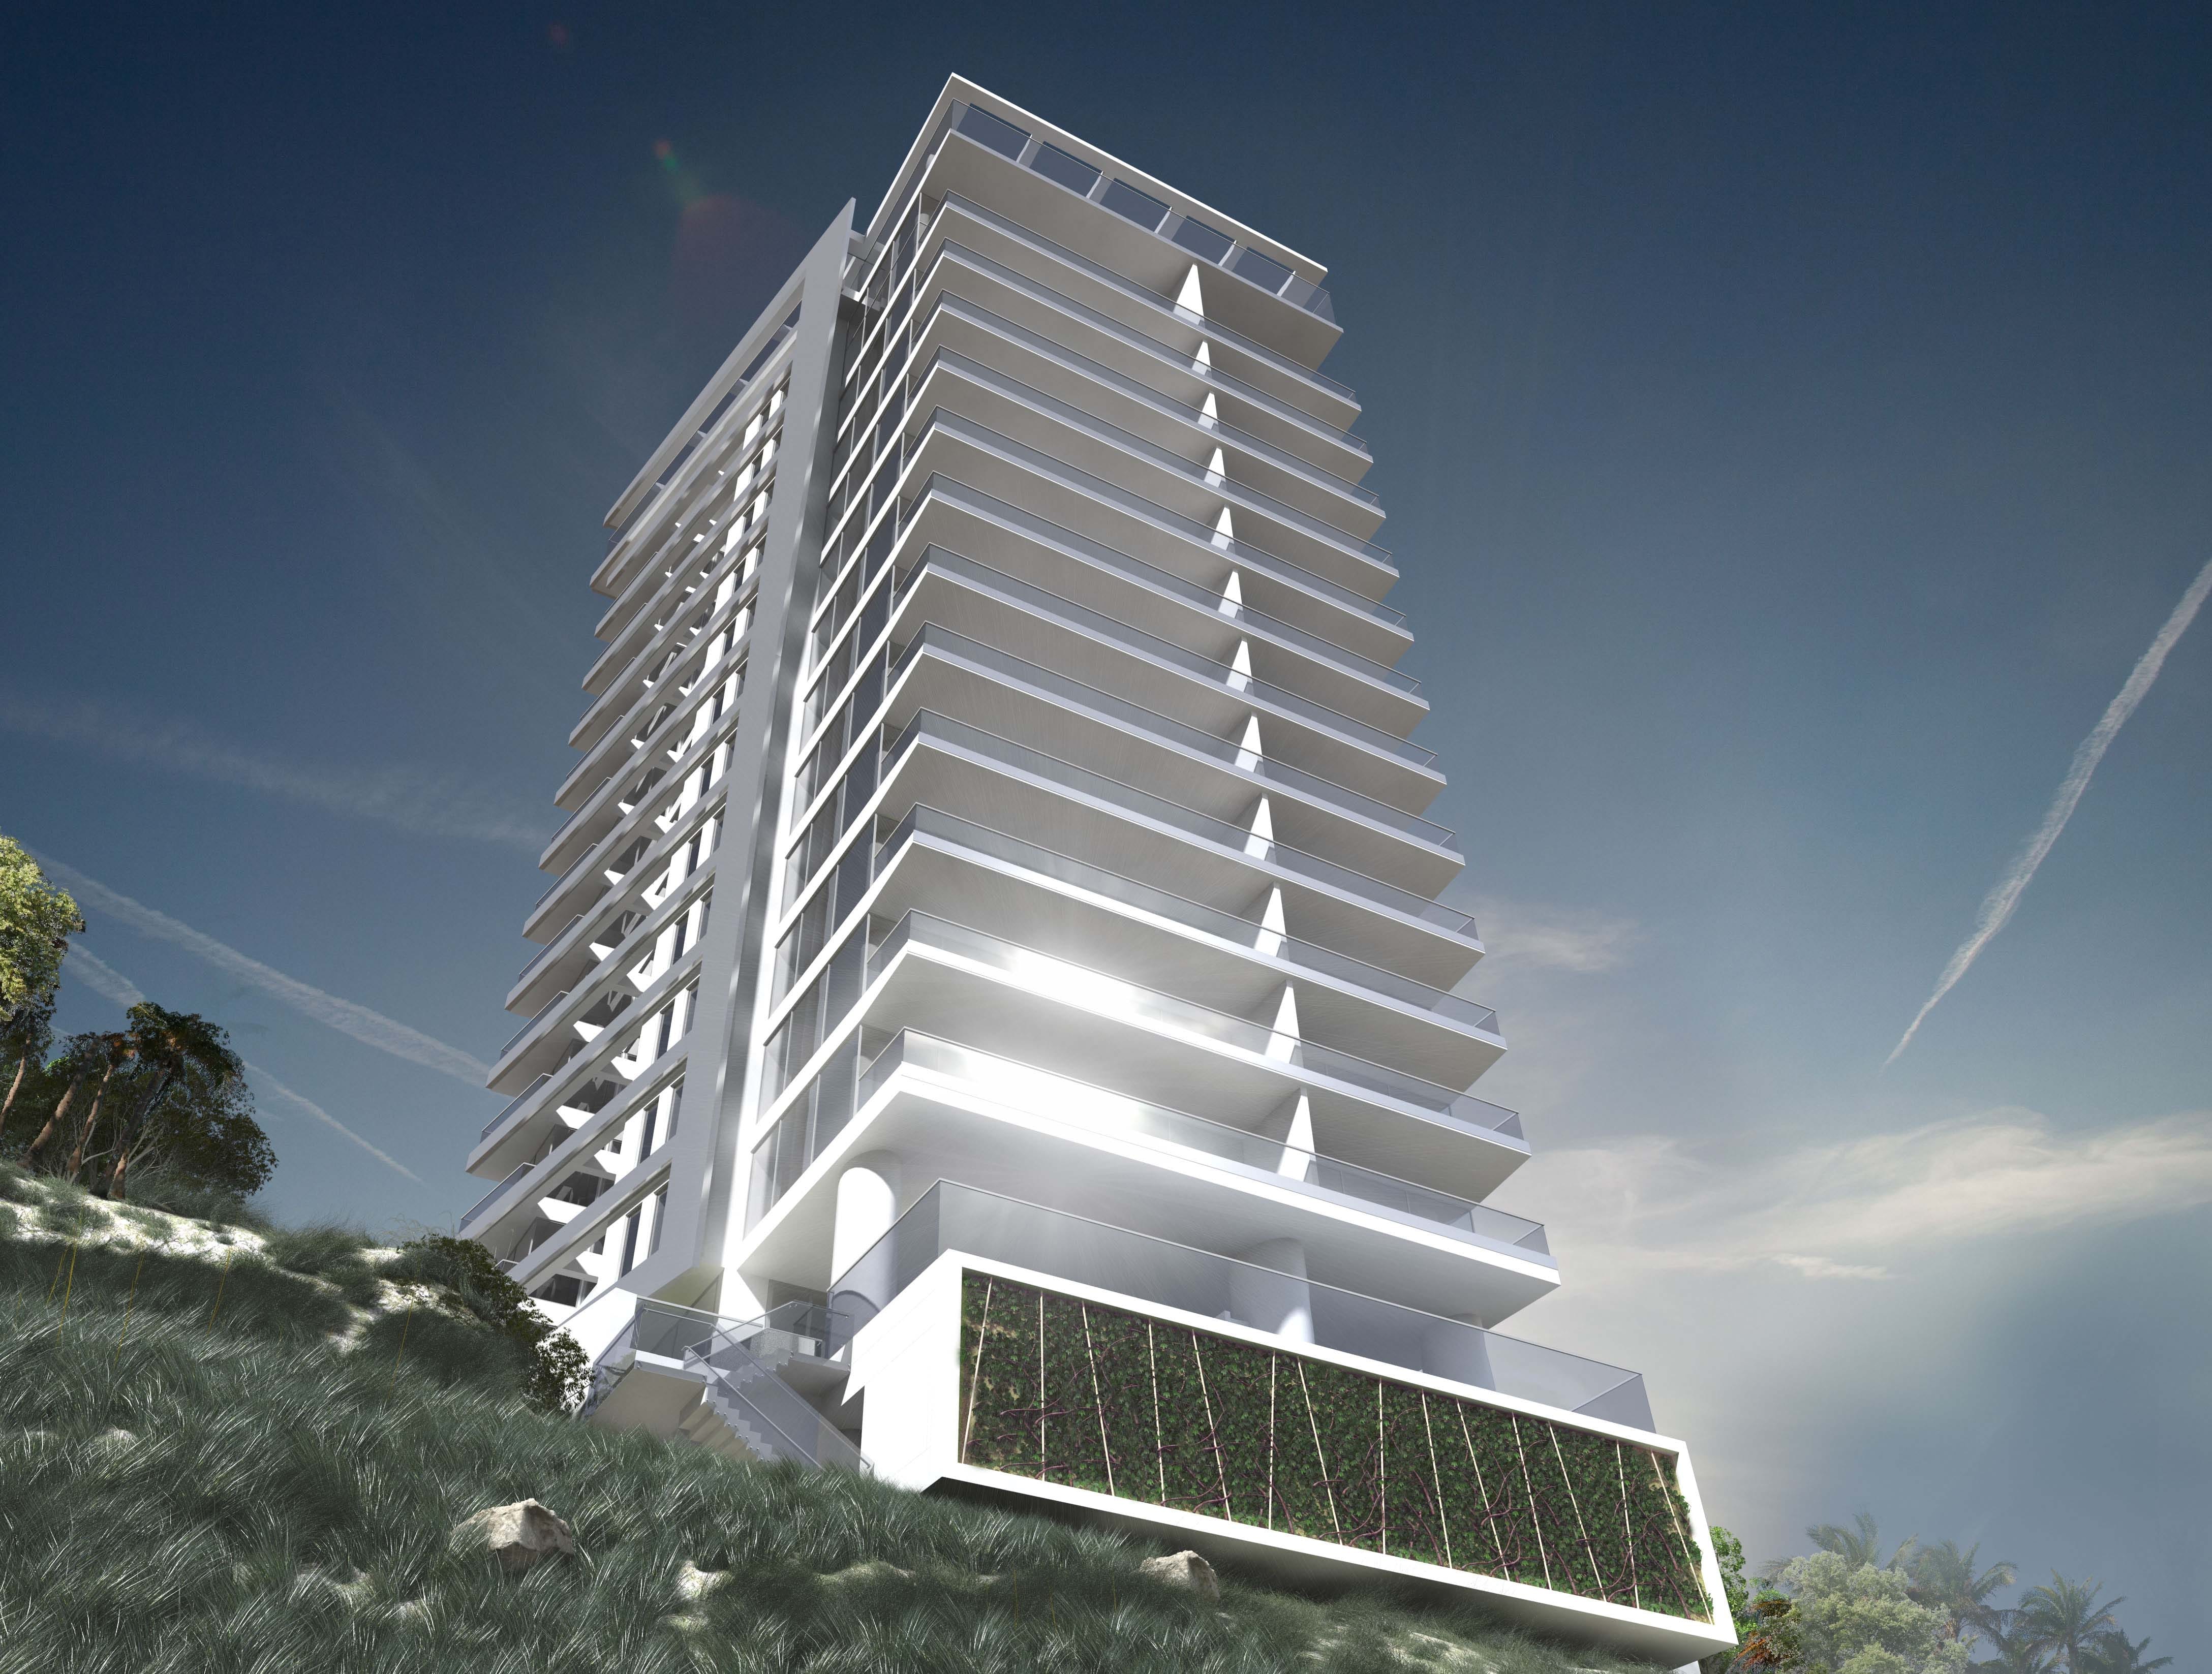 Ambar Infinity, located in Santa Maria, Colombia, has received a preliminary EDGE certificate from CAMACOL.